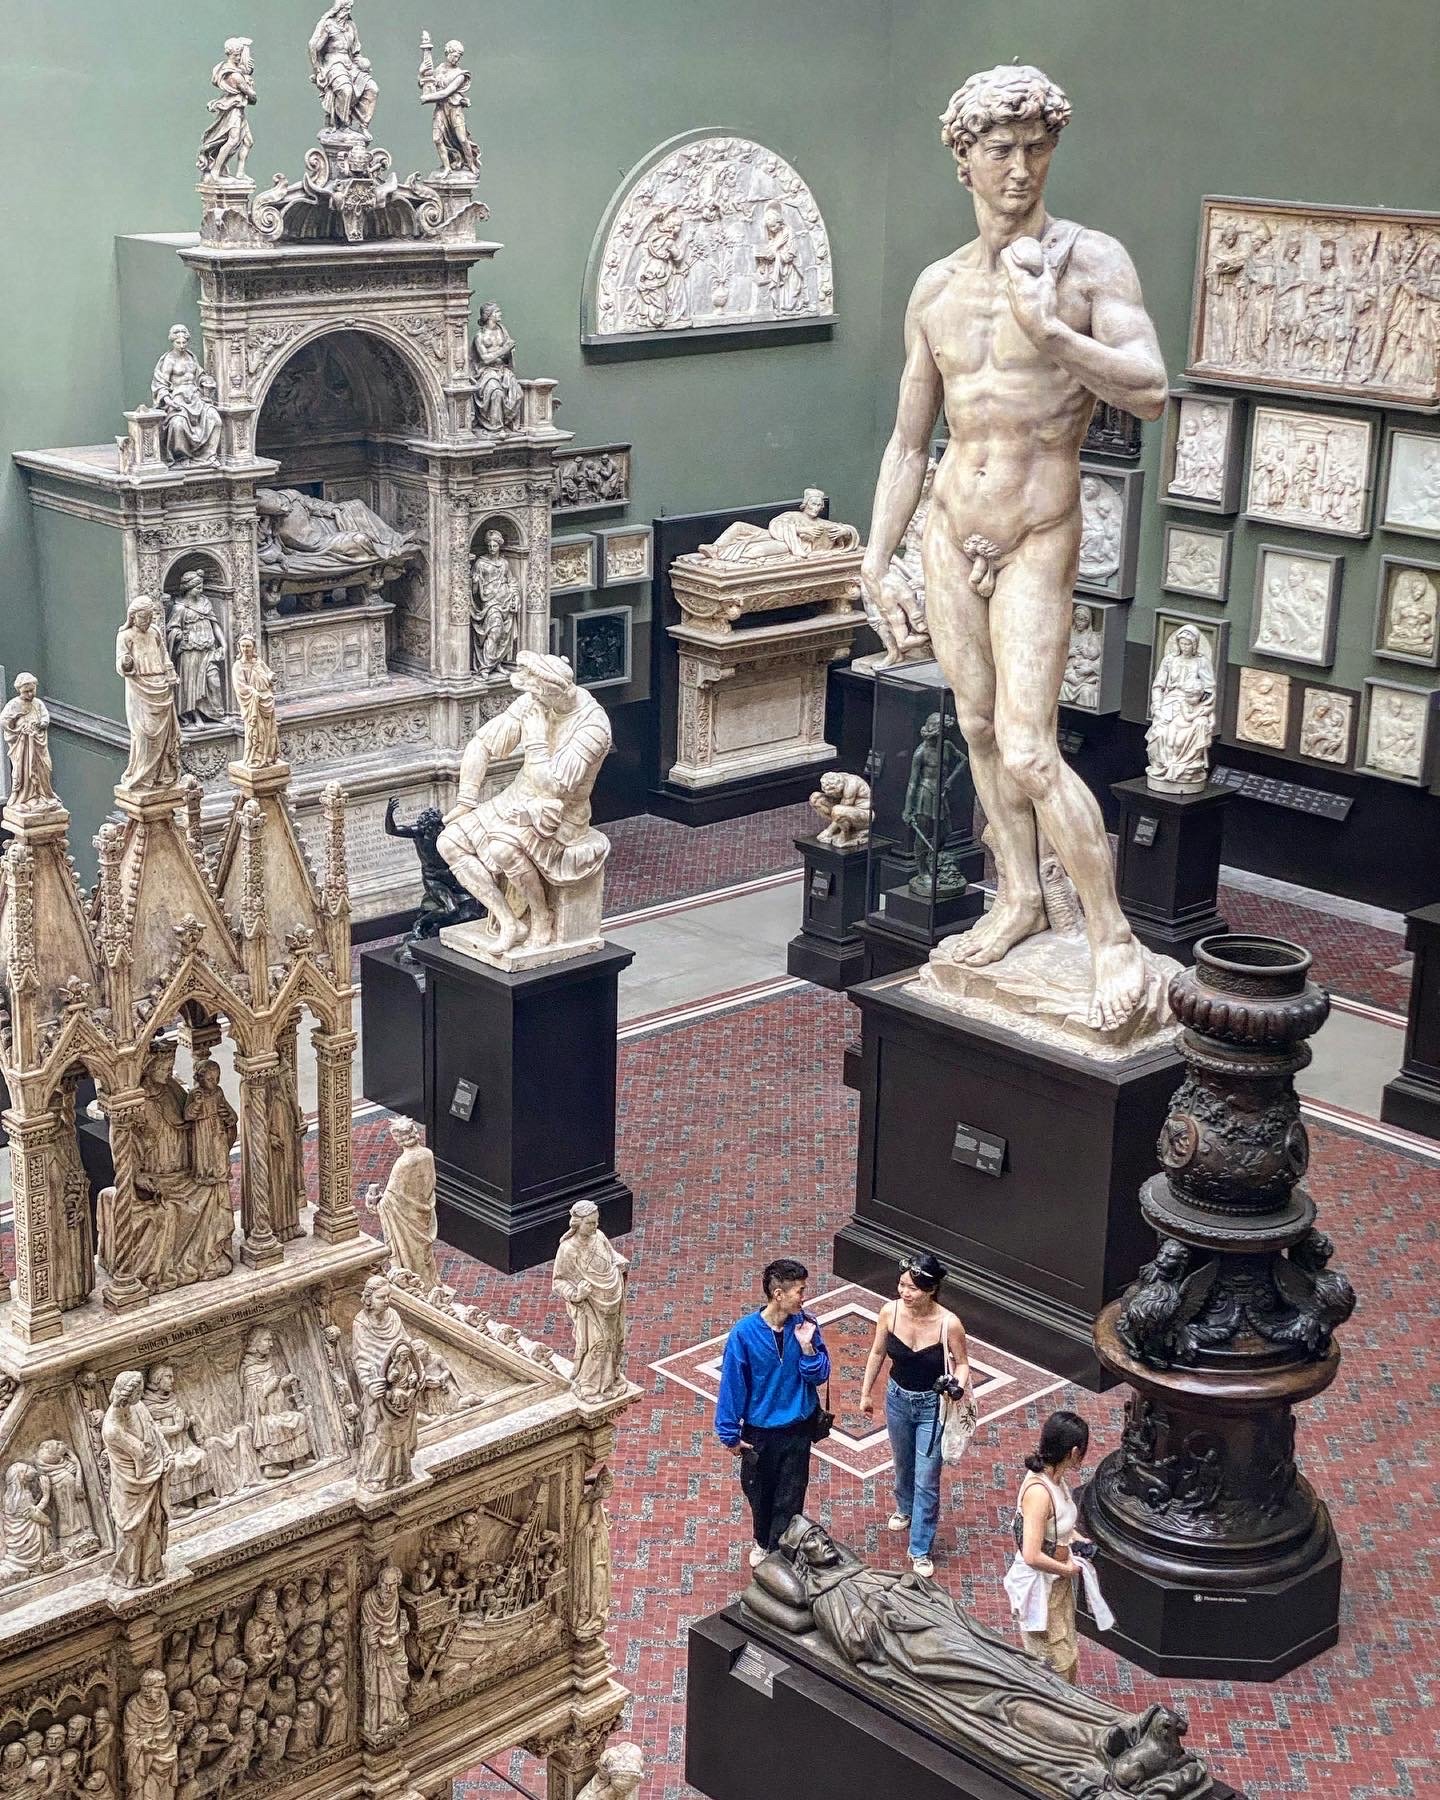  Plaster cast replicas of historic works of art are displayed in the Cast Room at the Victoria & Albert Museum.  One of my parent’s favorite activities was to explore London’s museums. 